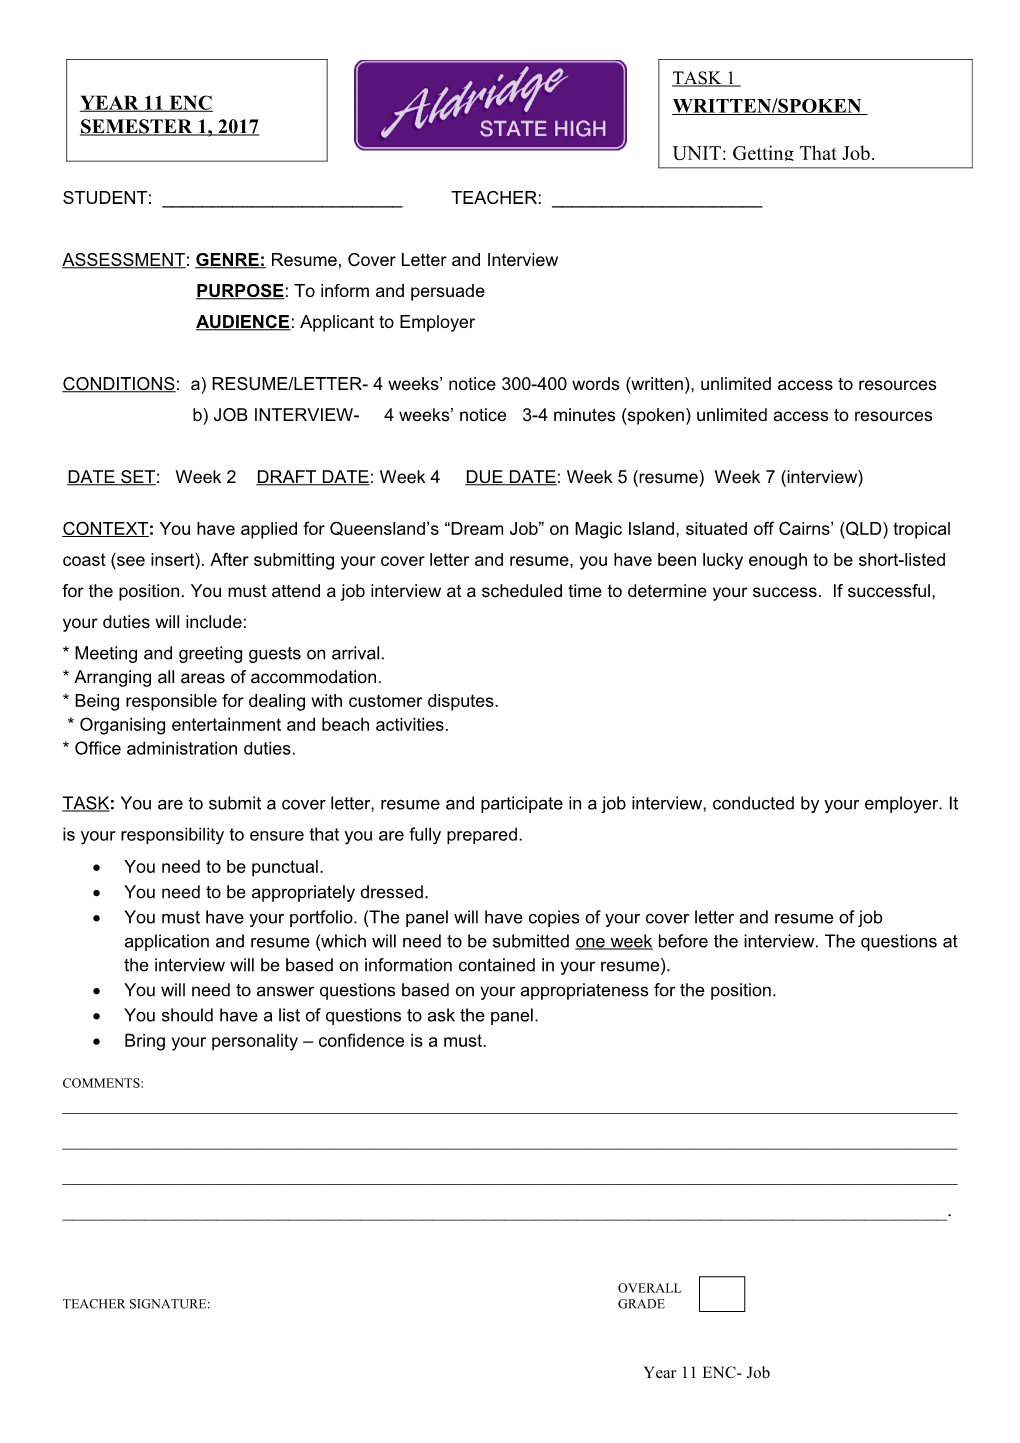 ASSESSMENT: GENRE: Resume, Cover Letter and Interview